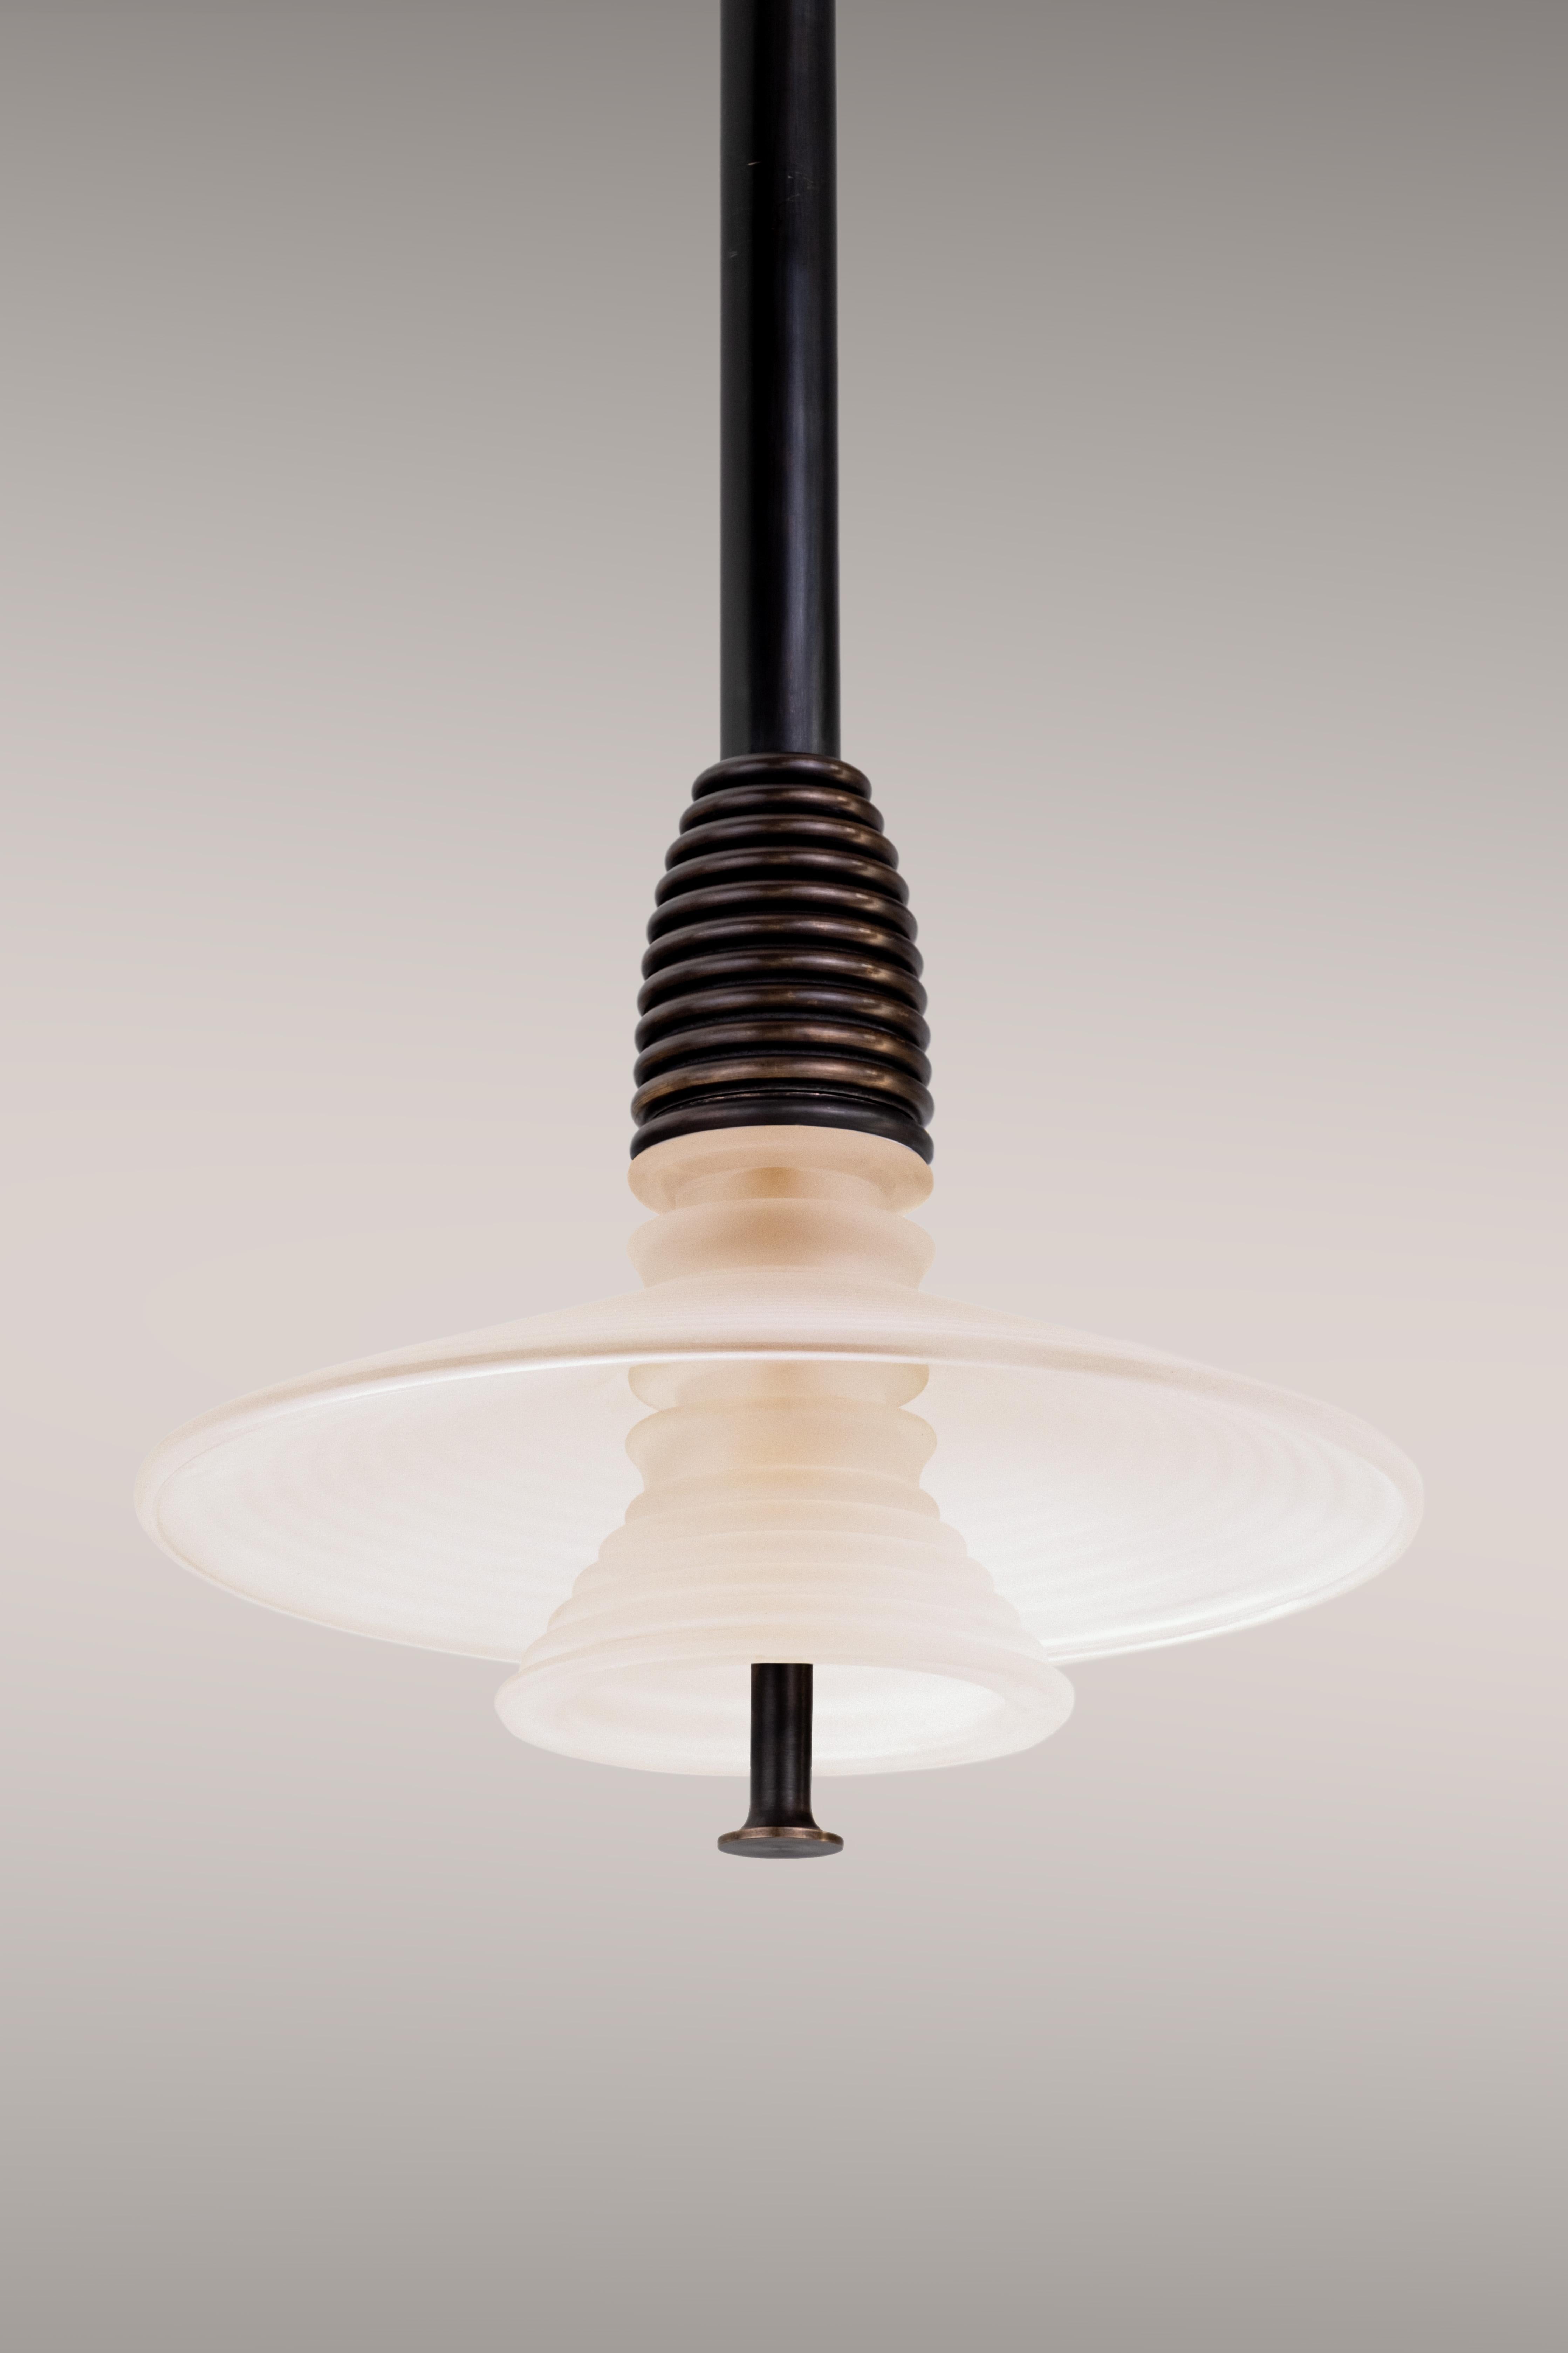 British The Insulator 'AB' Pendant in dark brass and clear glass by NOVOCASTRIAN deco For Sale